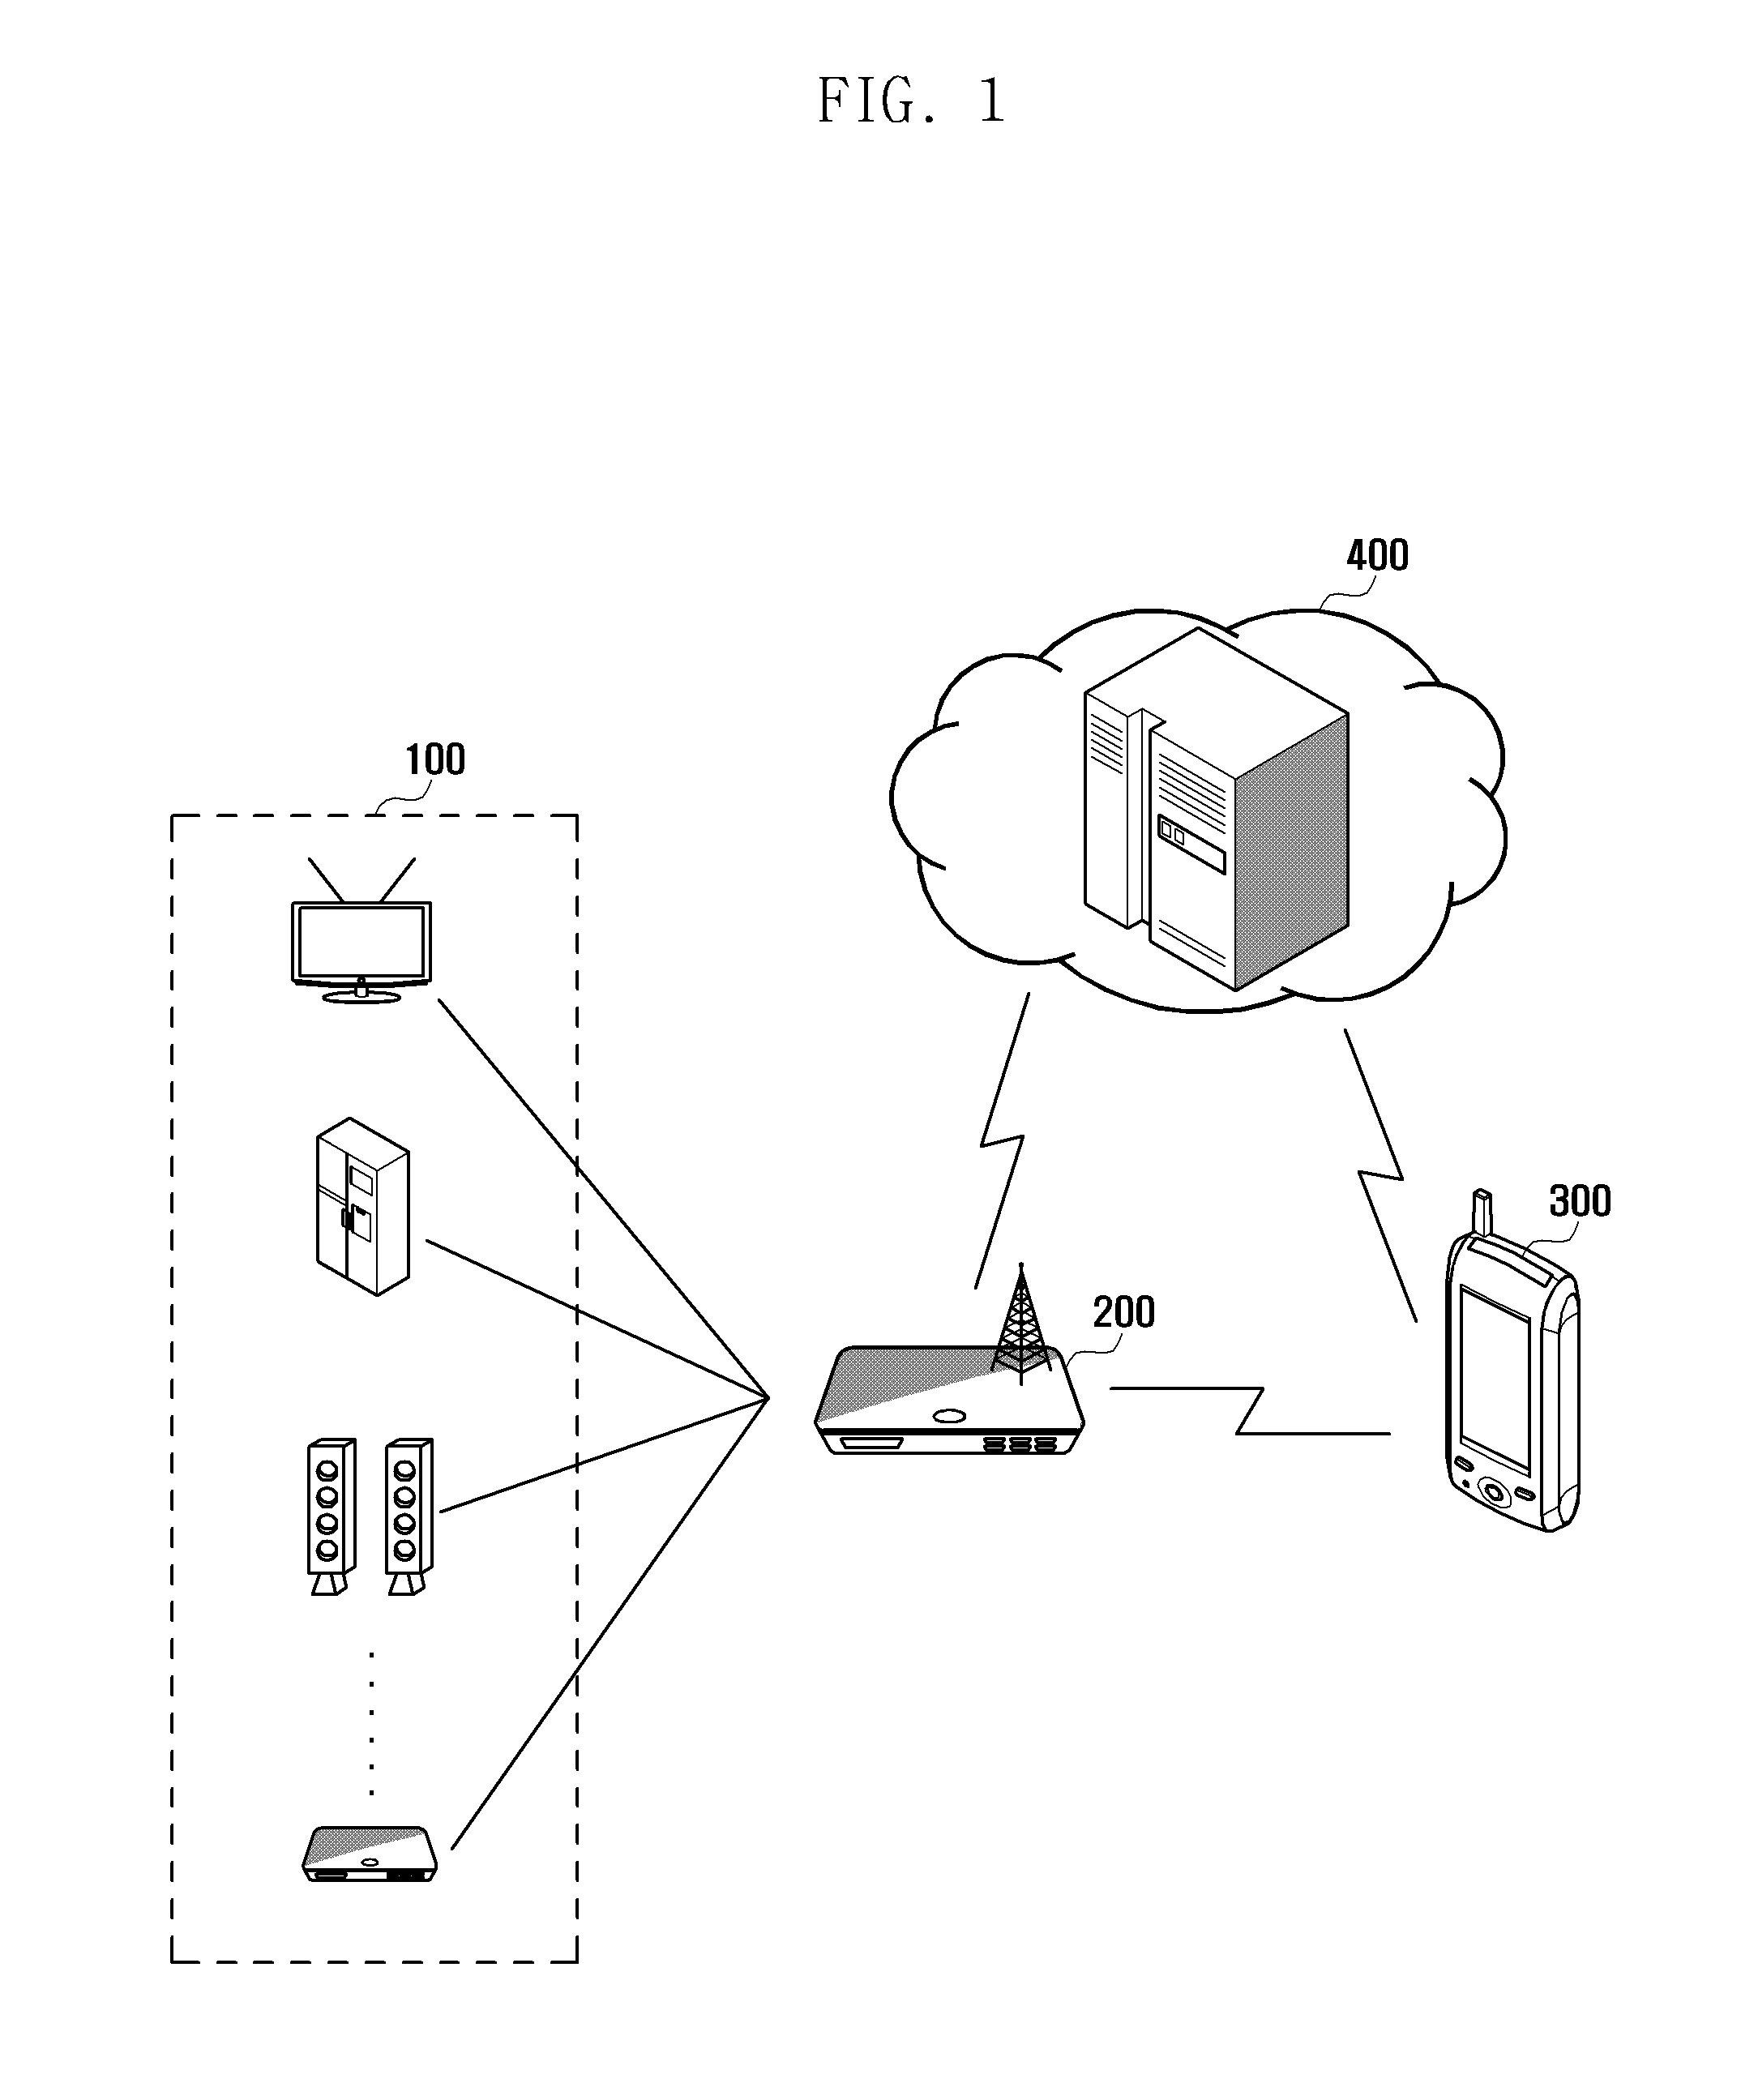 Group-wise device management system and method